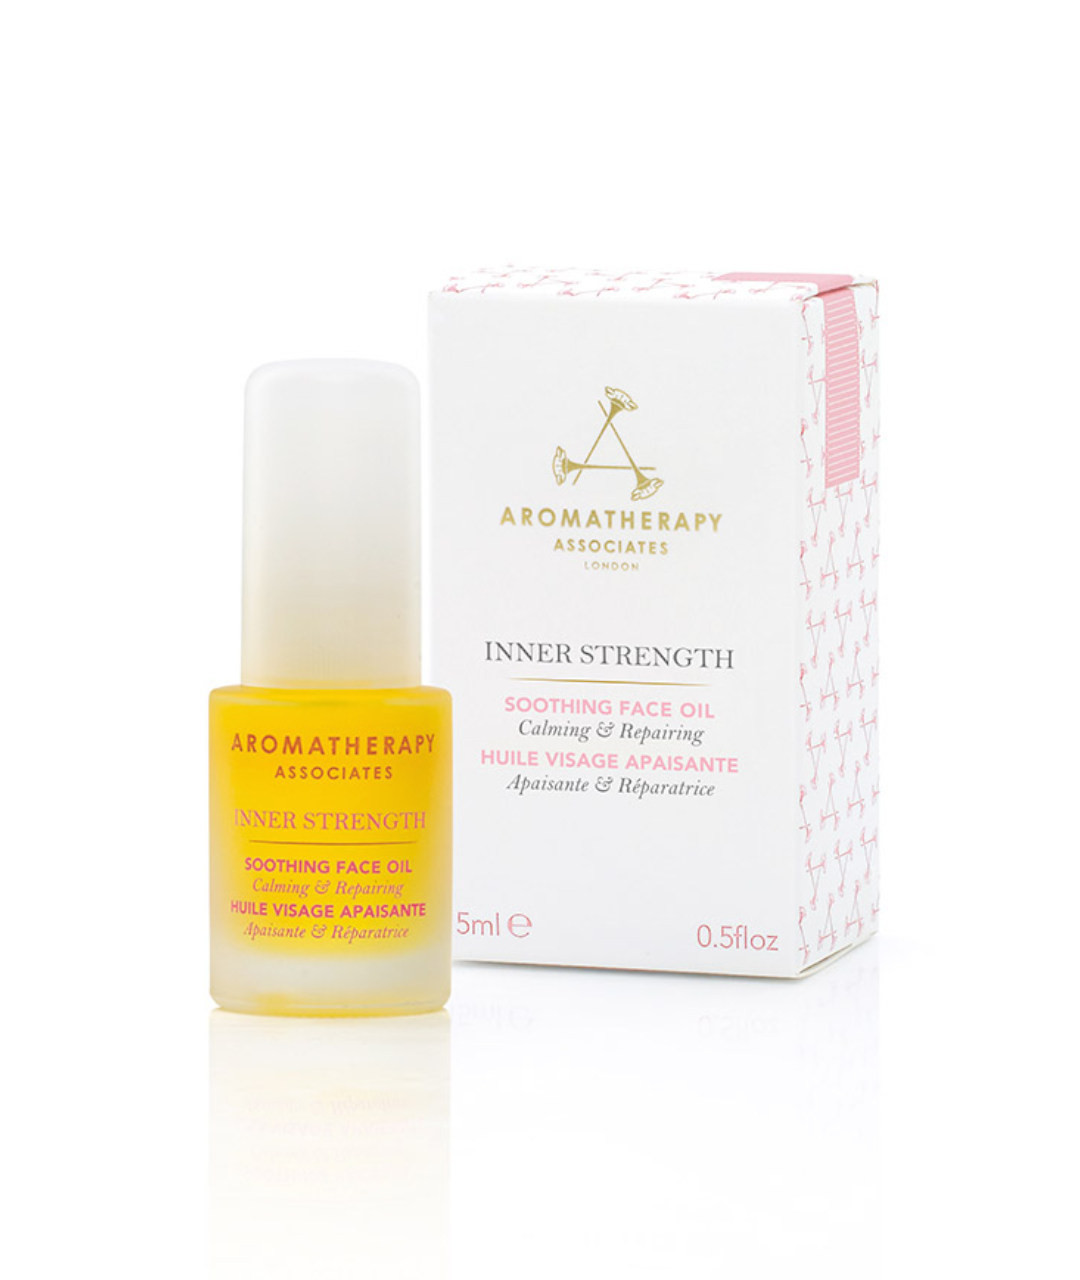 INNER STRENGTH SOOTHING FACE OIL - Soothing face oil 15ml